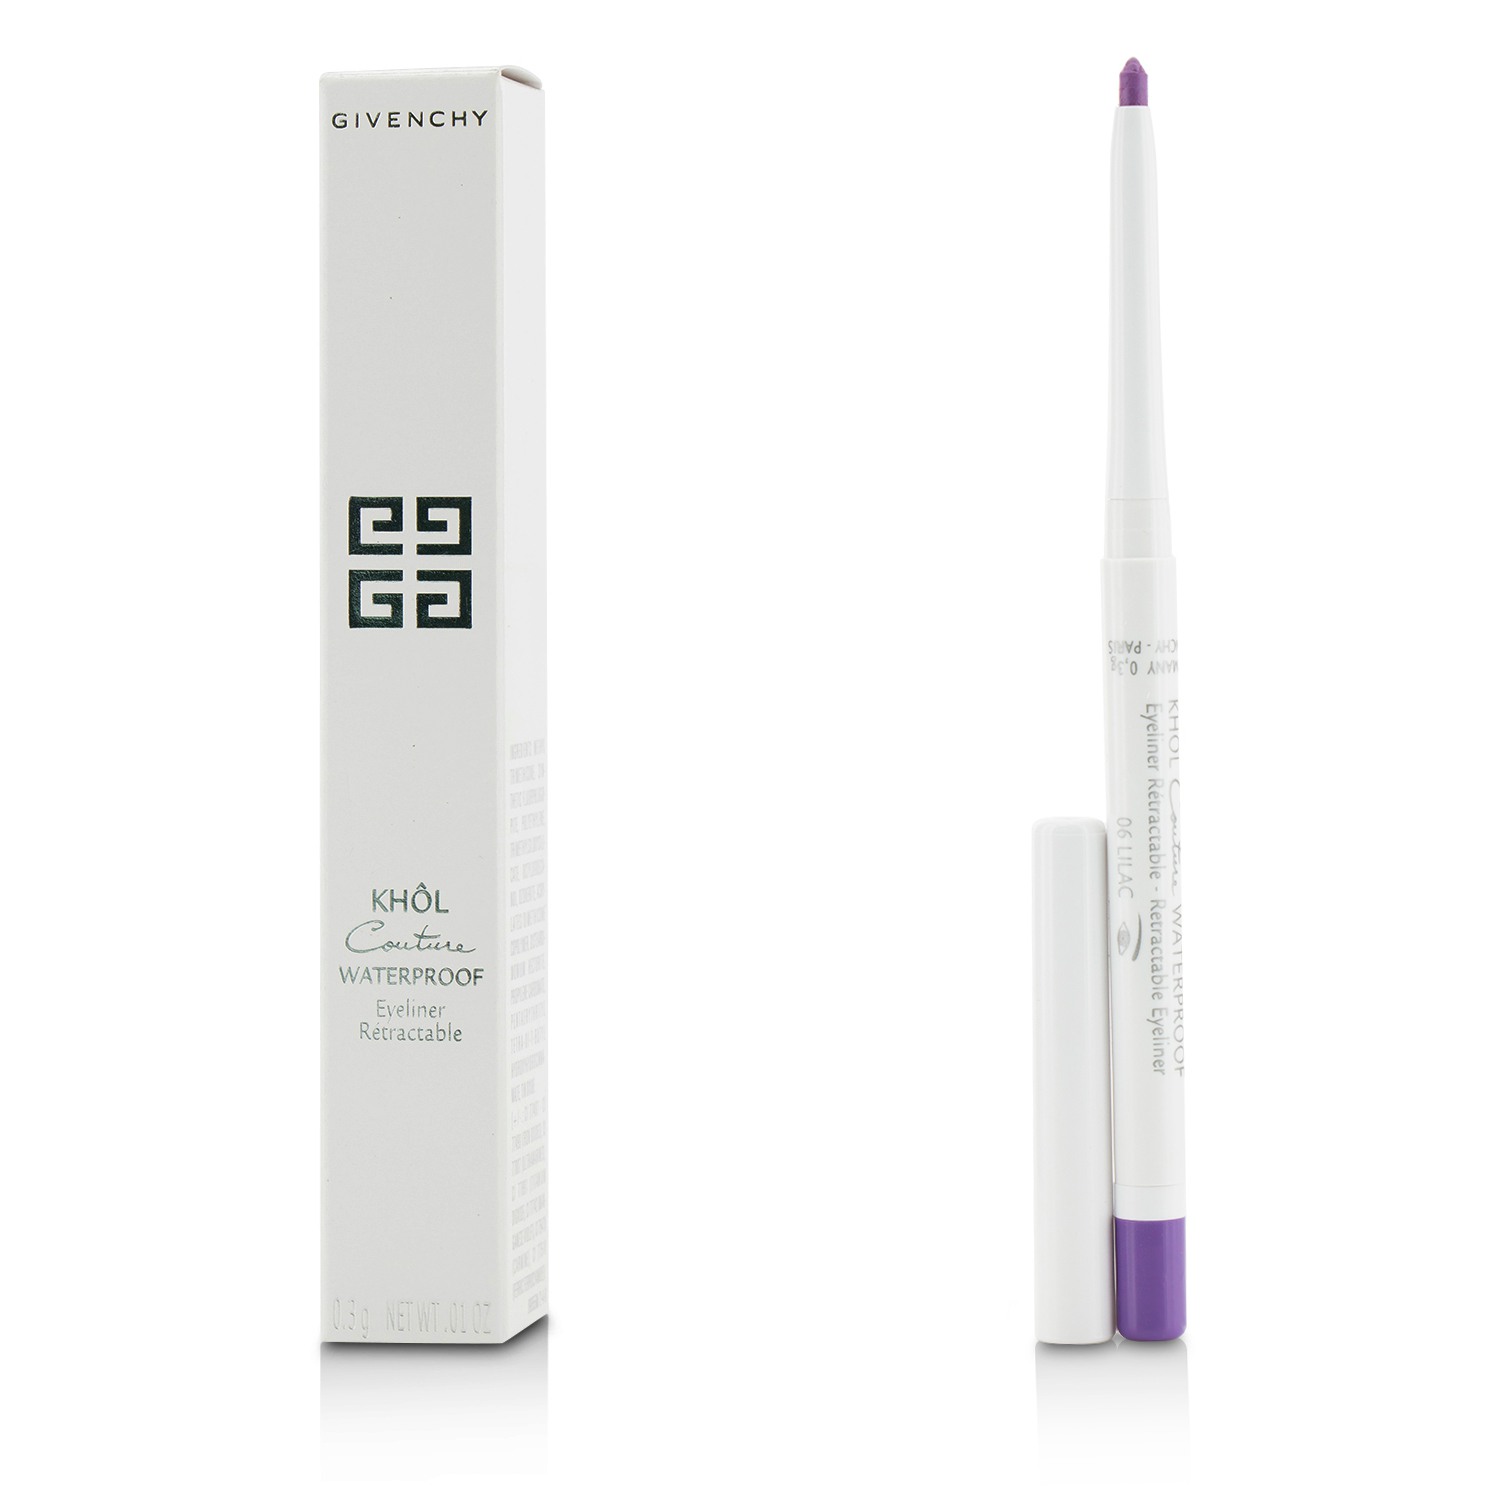 Khol Couture Waterproof Retractable Eyeliner - # 06 Lilac Givenchy Image